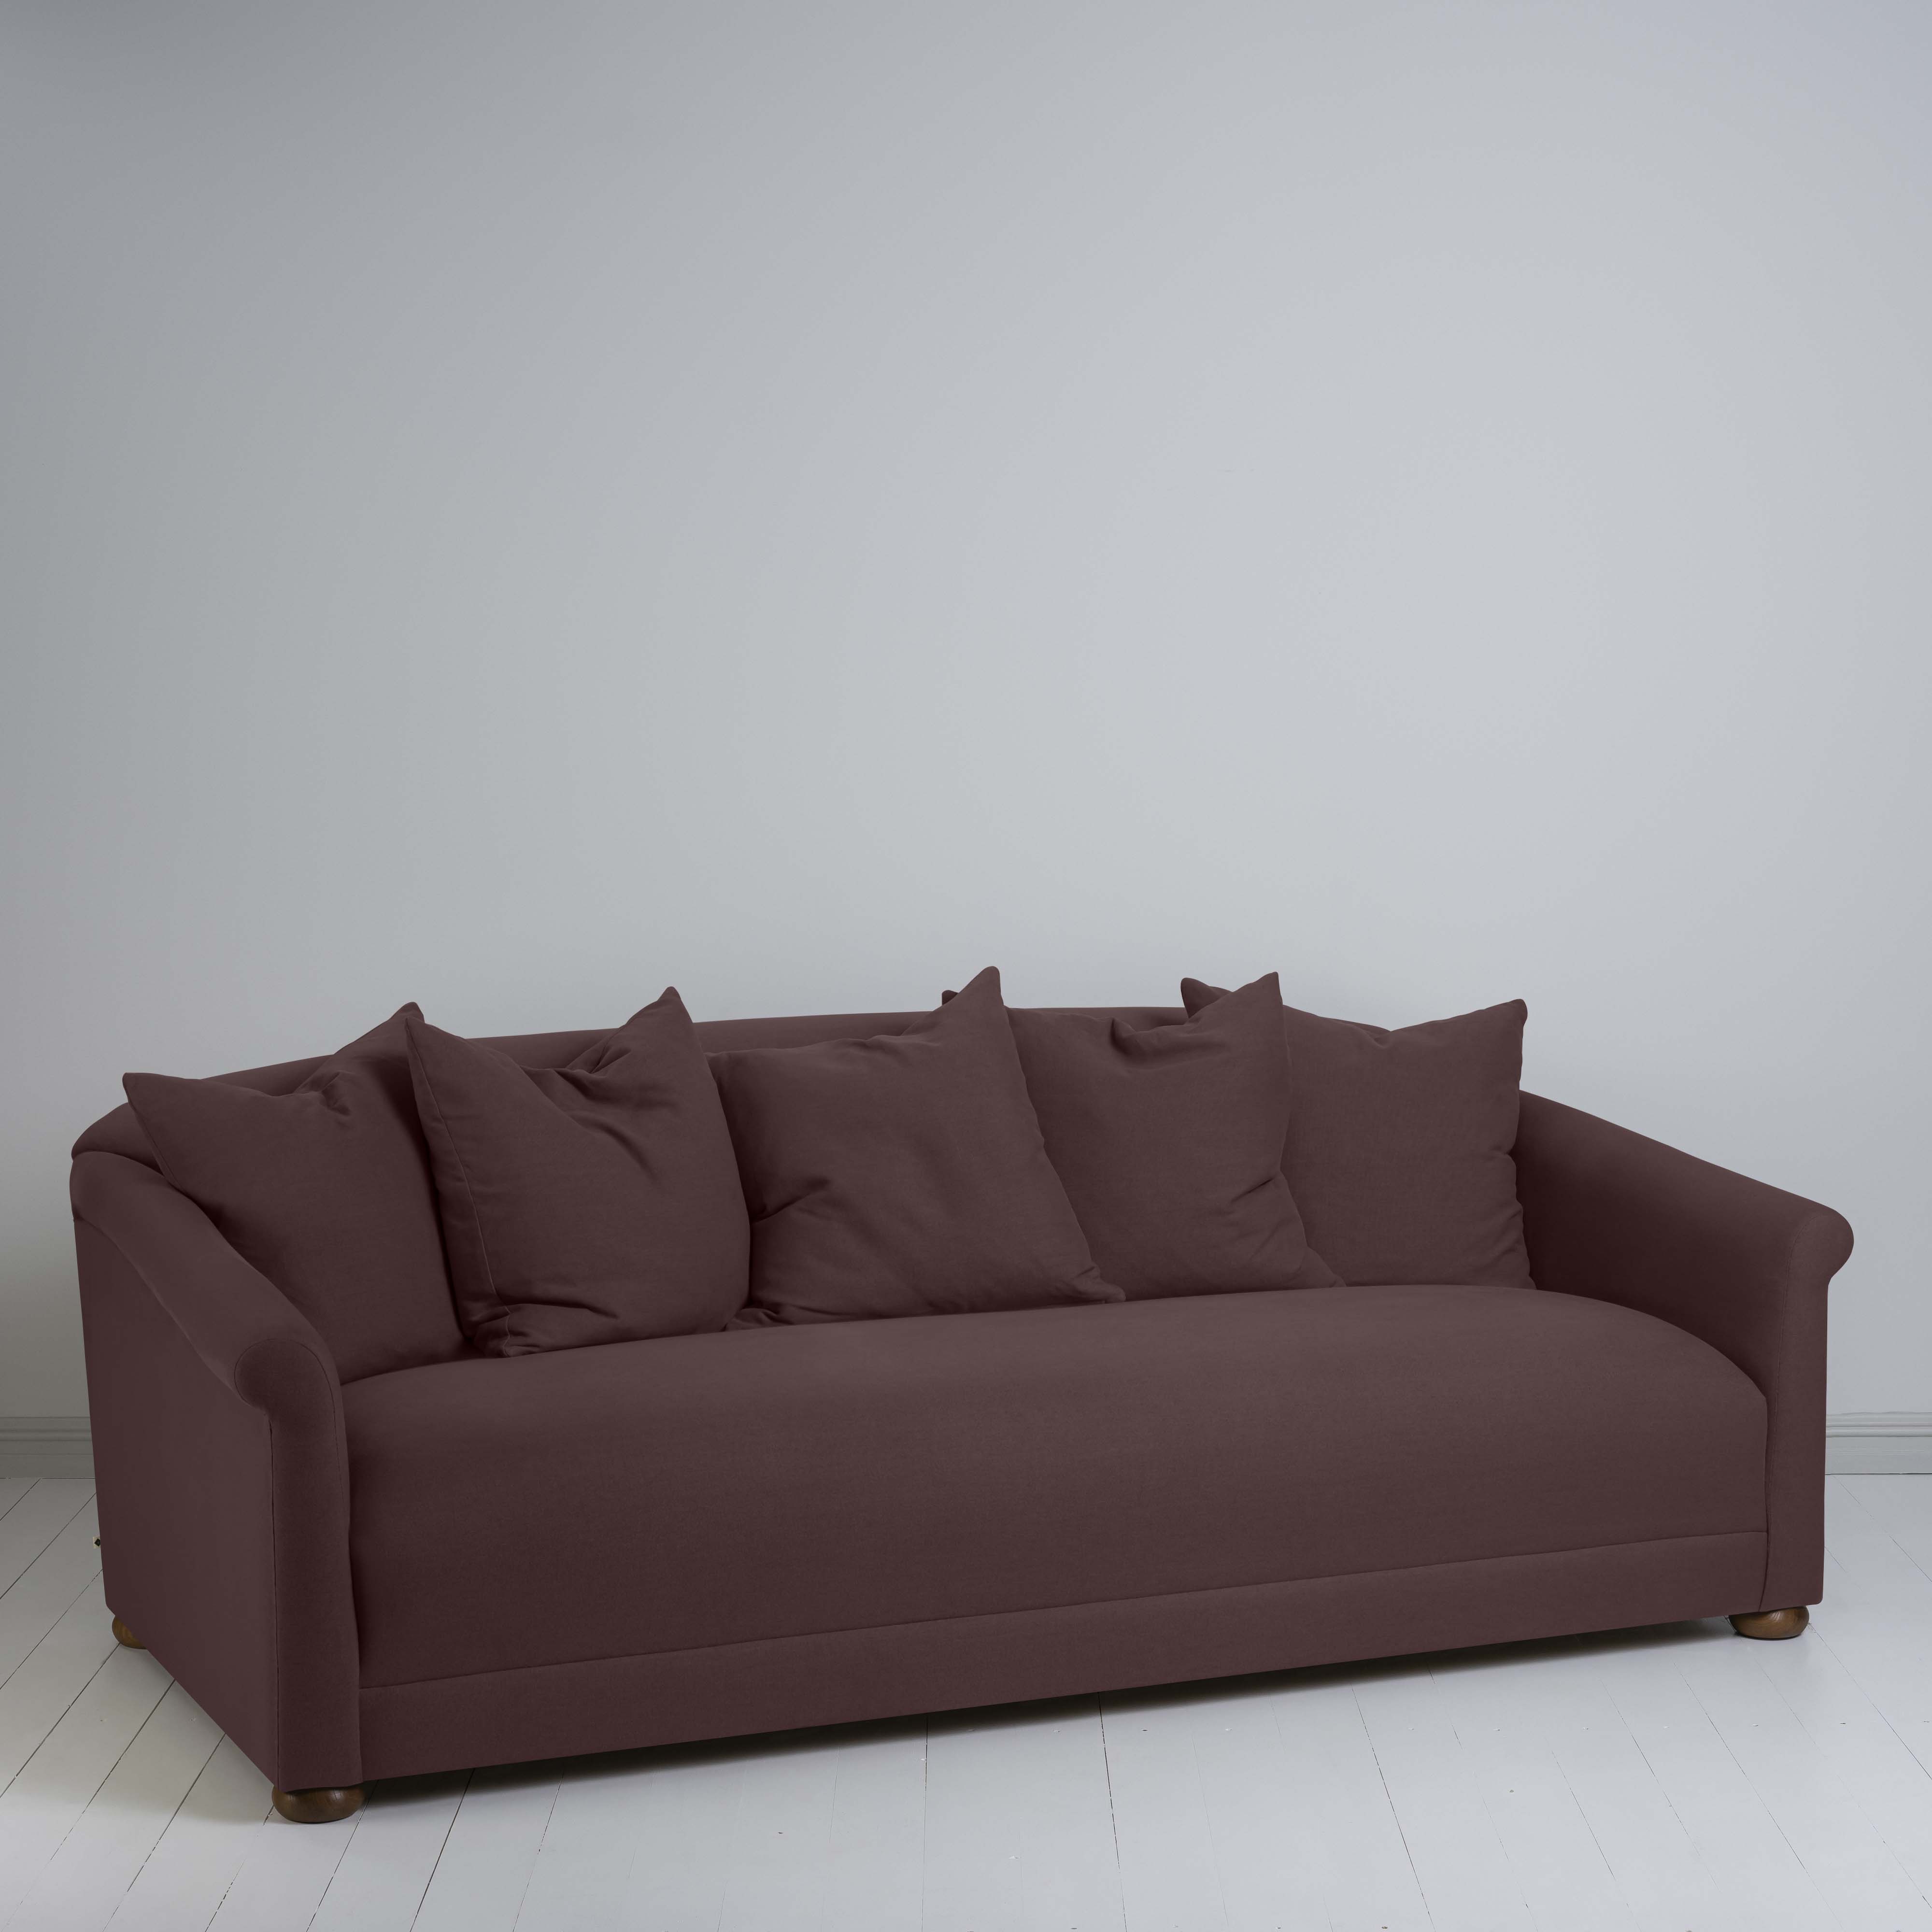  More the Merrier 4 Seater Sofa in Laidback Linen Damson 